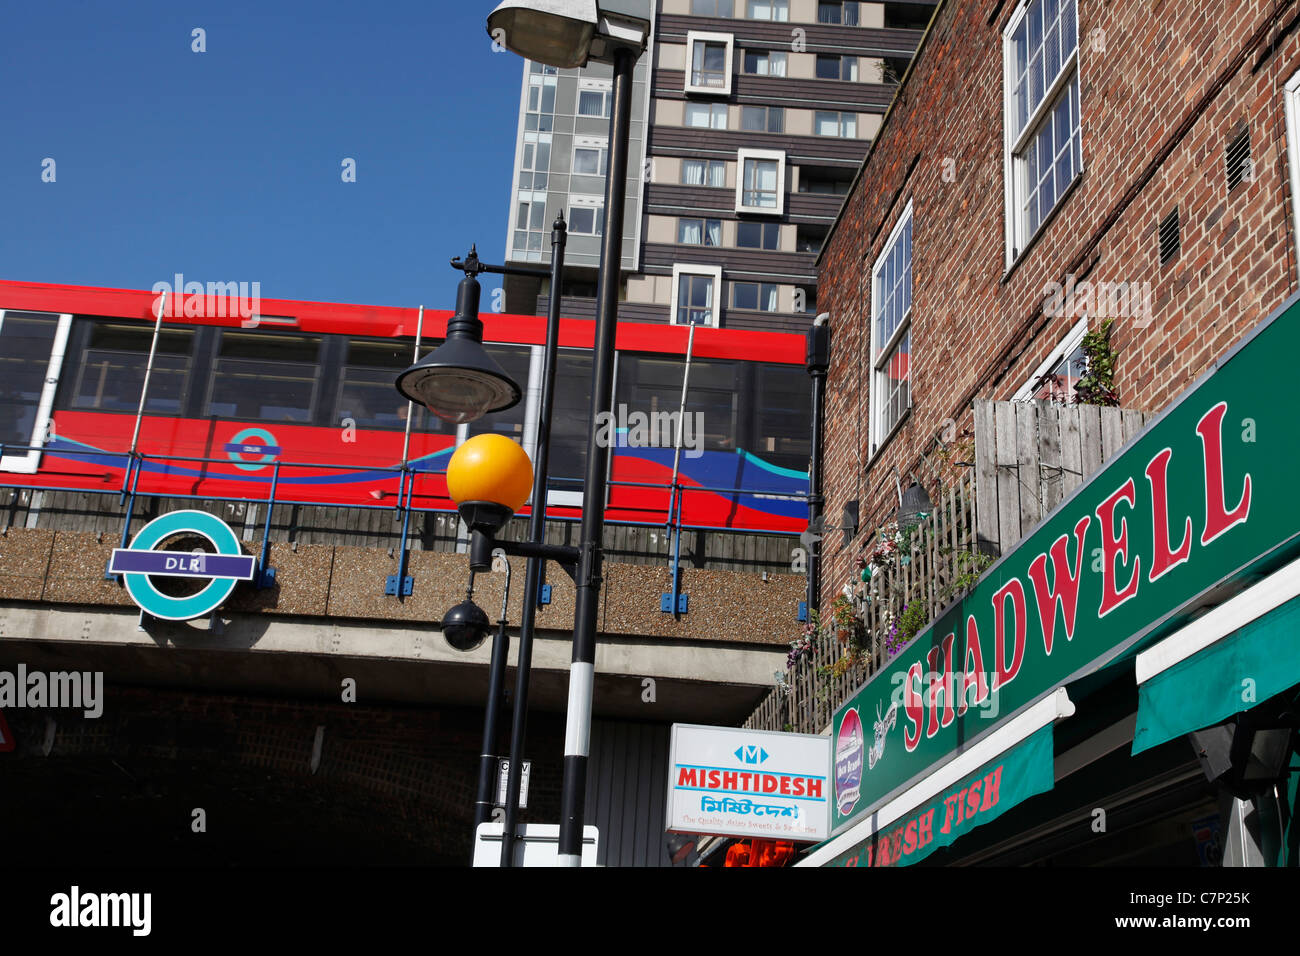 Dockland Light Railway DLR train past Shadwell station in the multi ethnic area of the east end of London, UK Stock Photo